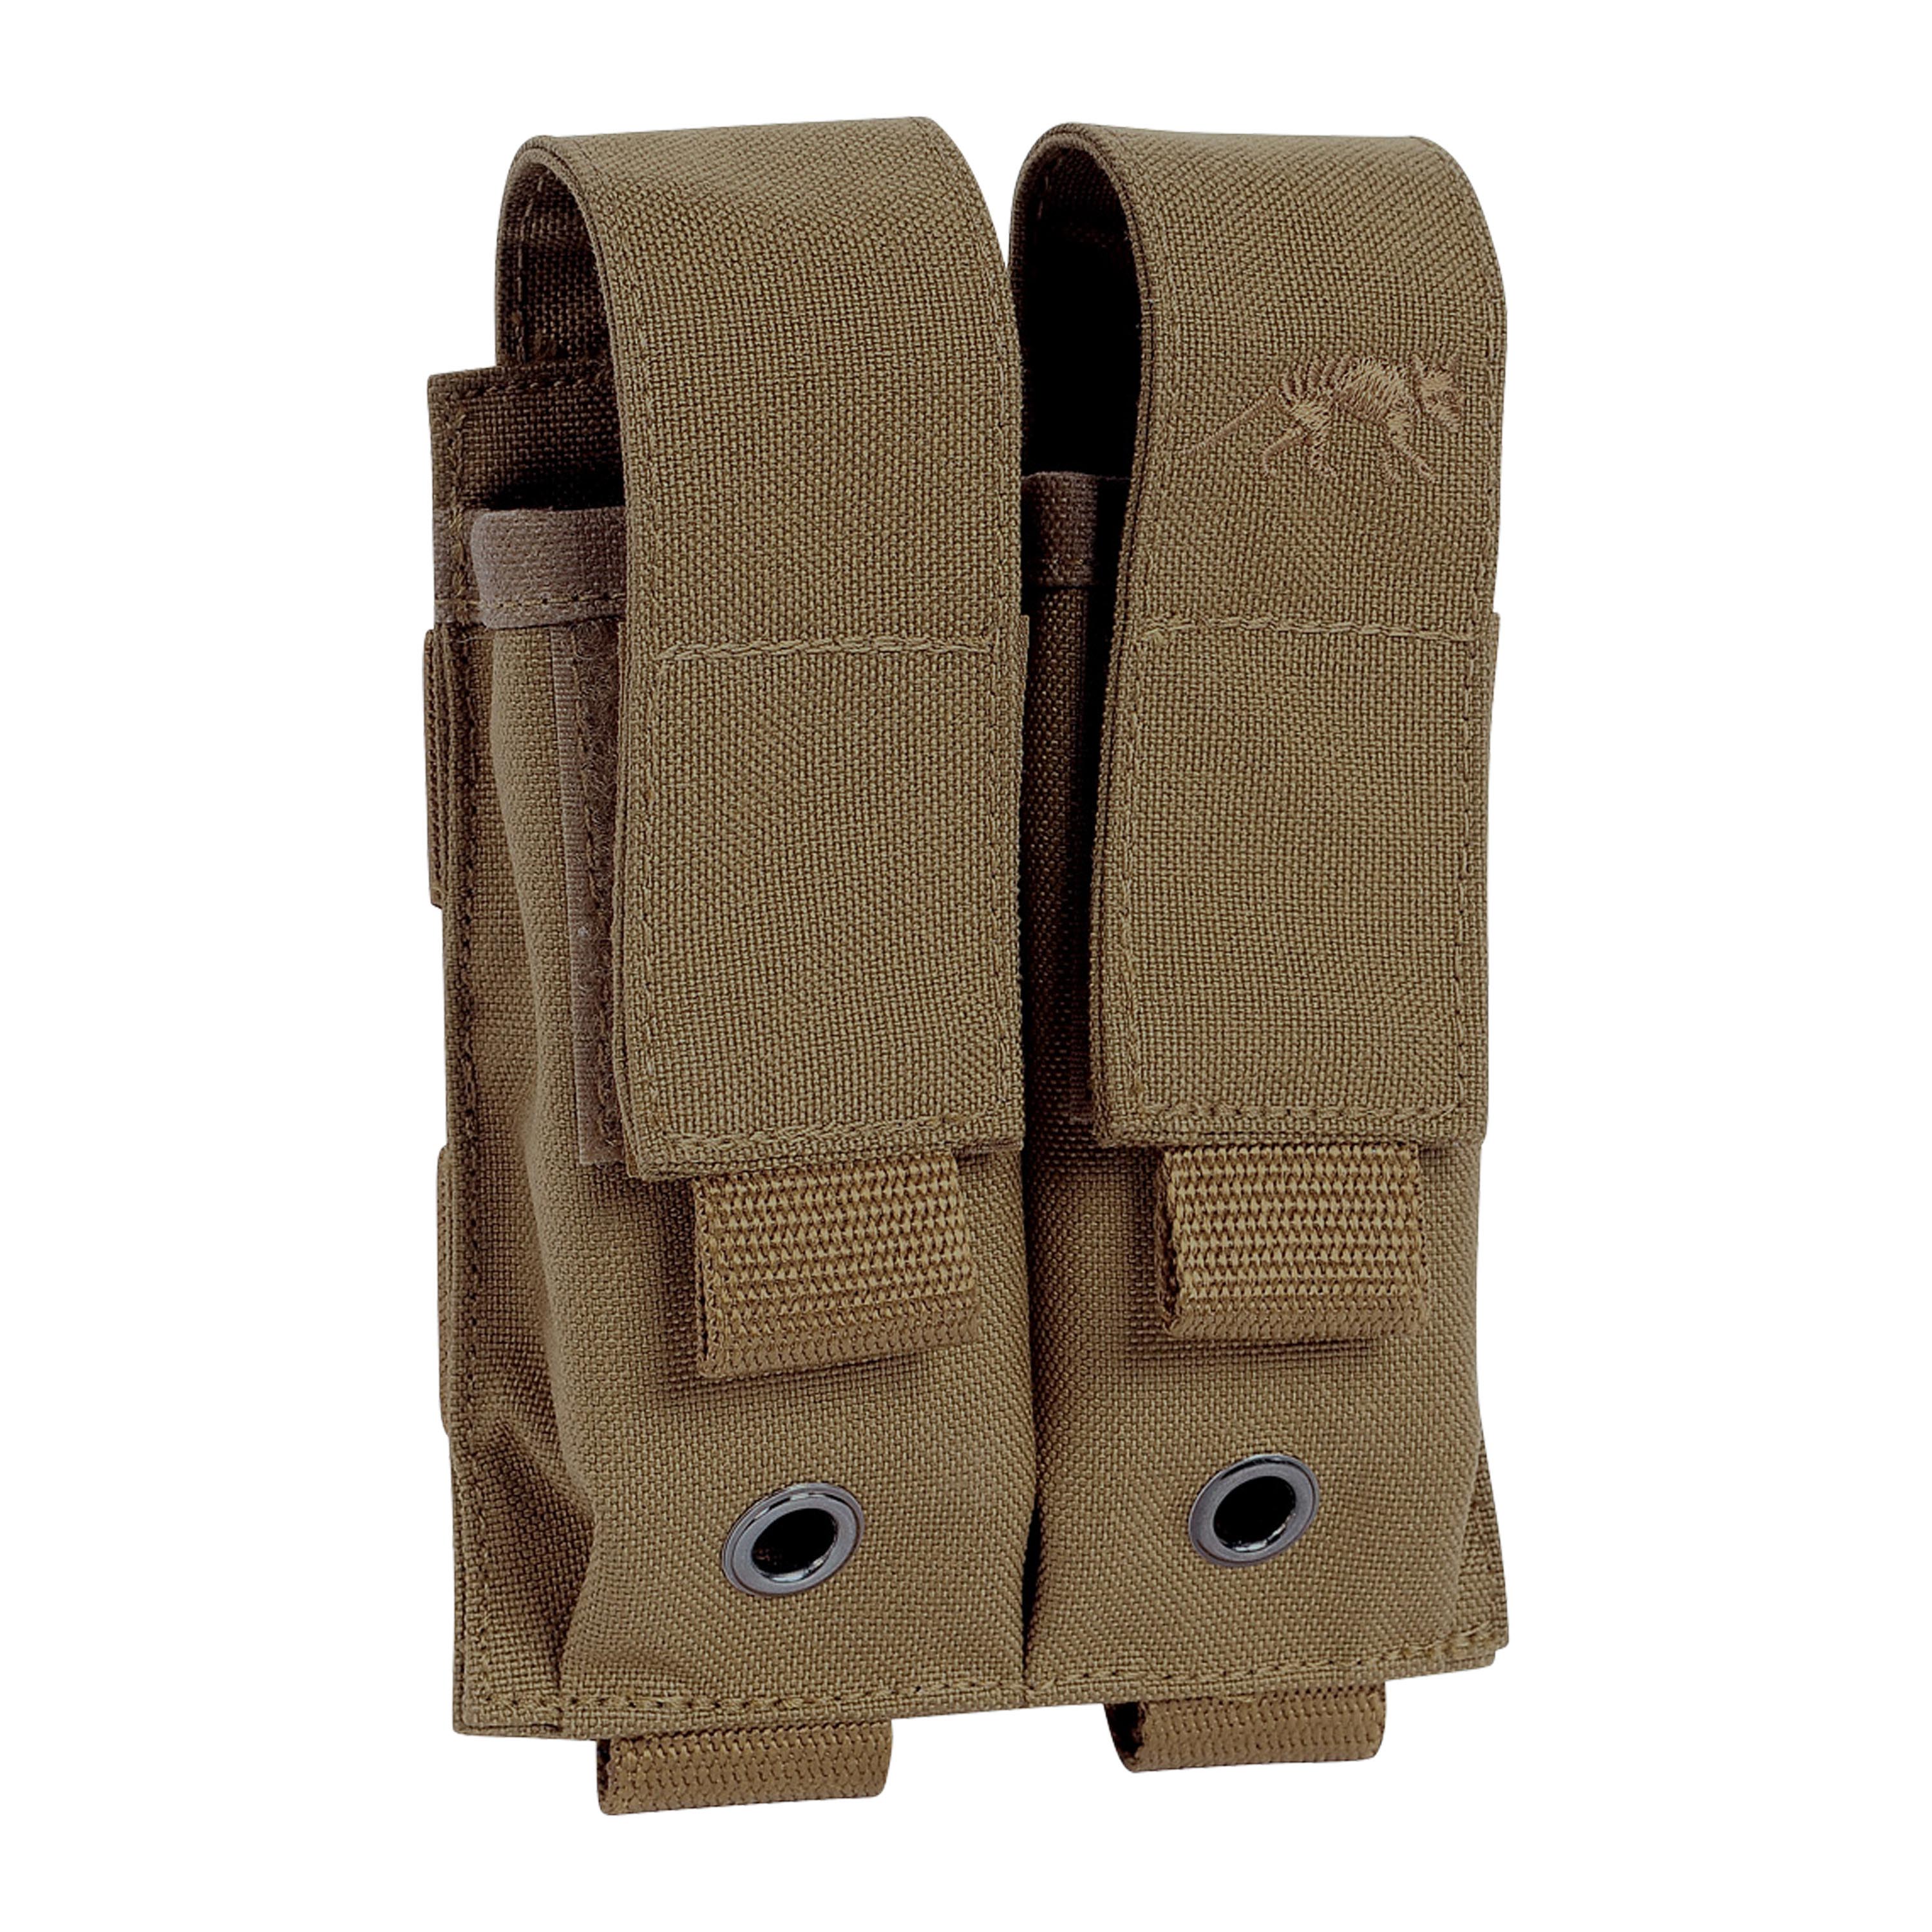 Tasmanian Tiger double magazine pouch with MOLLE system for pistol magazine...